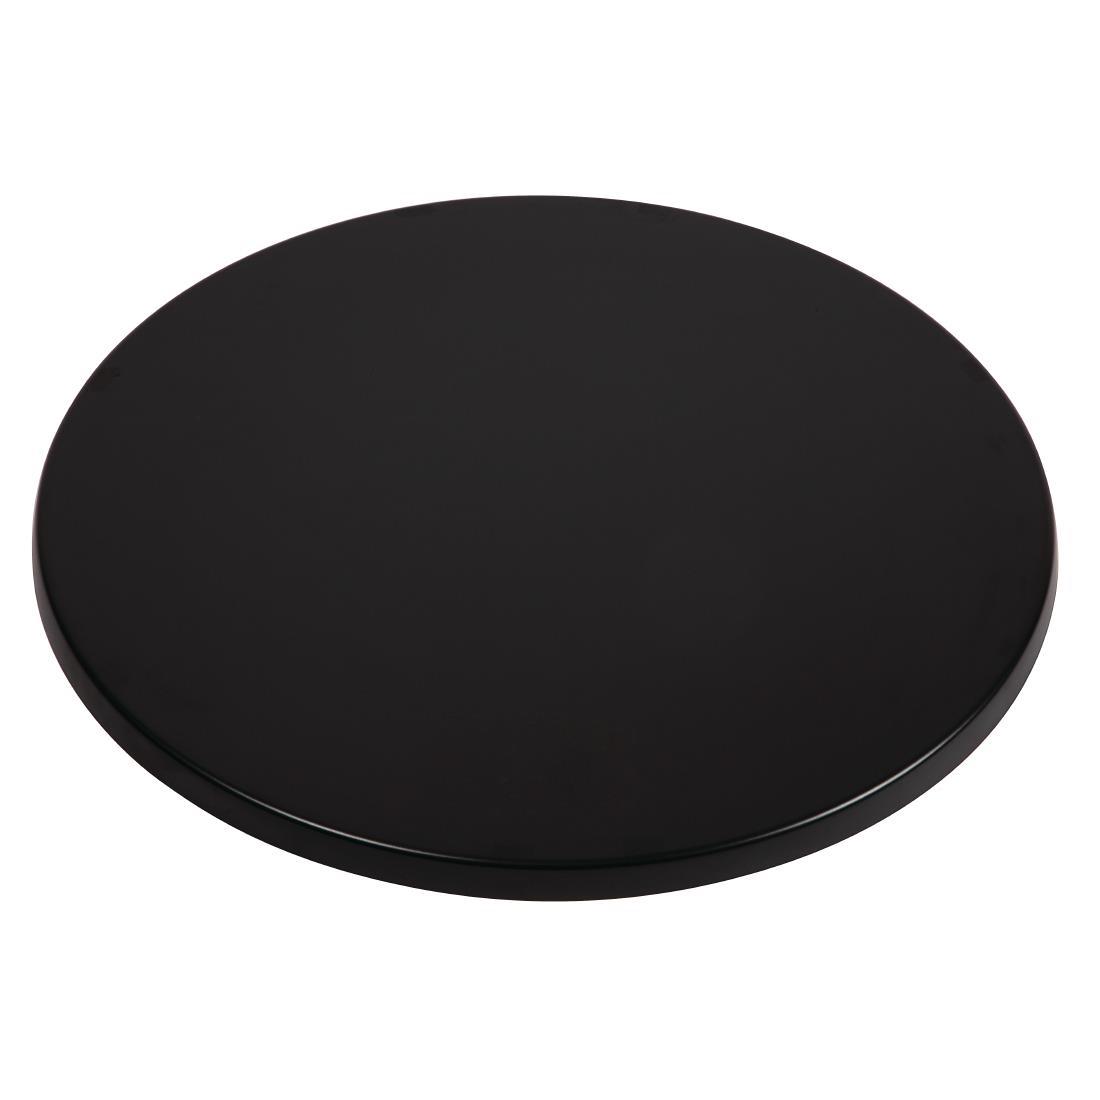 Werzalit Pre-drilled Round Table Top Black 800mm - CC513  - 1